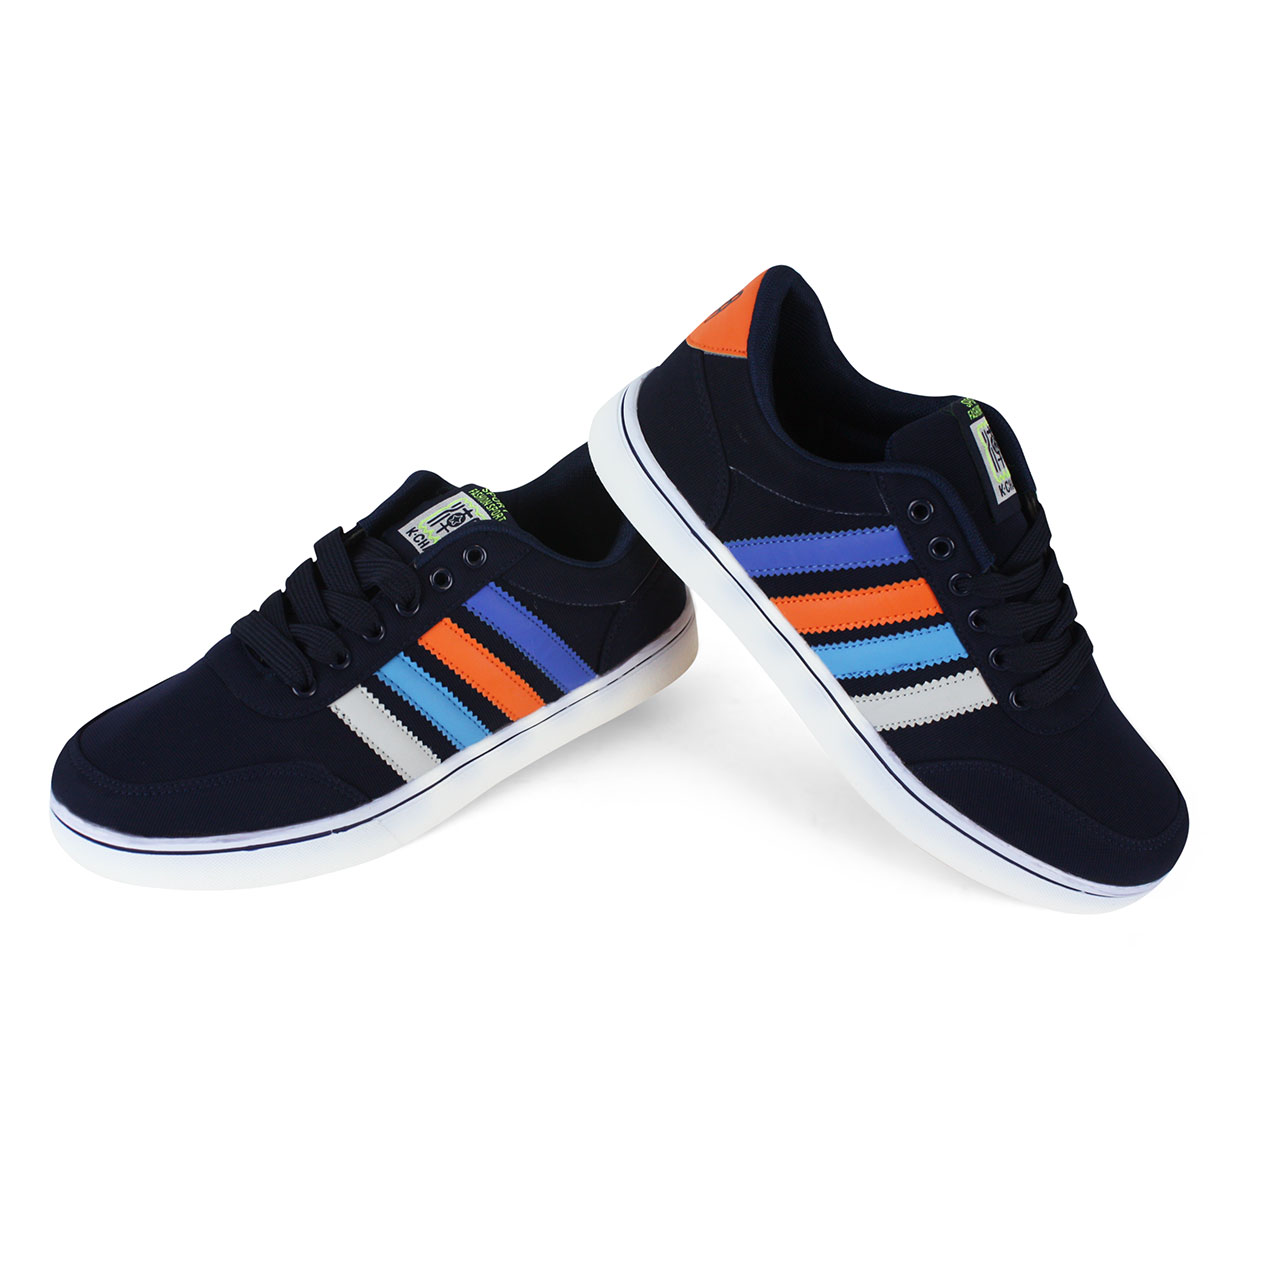 Trendy Lace-Up Sport Striped Multi Colored Sneakers Shoes Mens - Ash/Blue